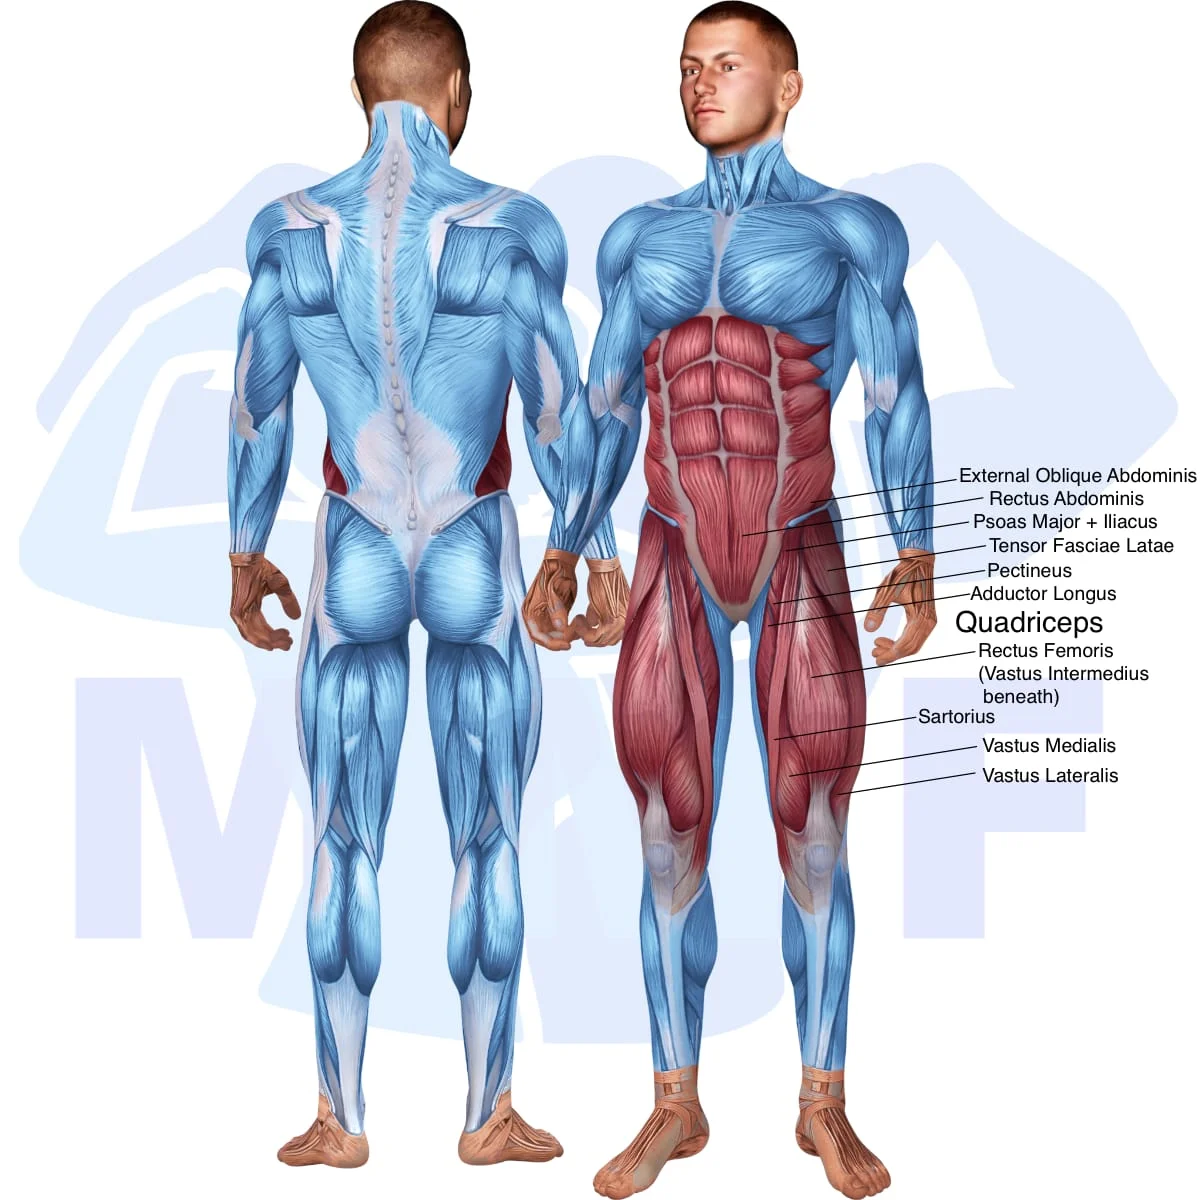 Image of the skeletal muscular system with the muscles used in the knee up with bands exercise highlighted in red and the rest in blue.